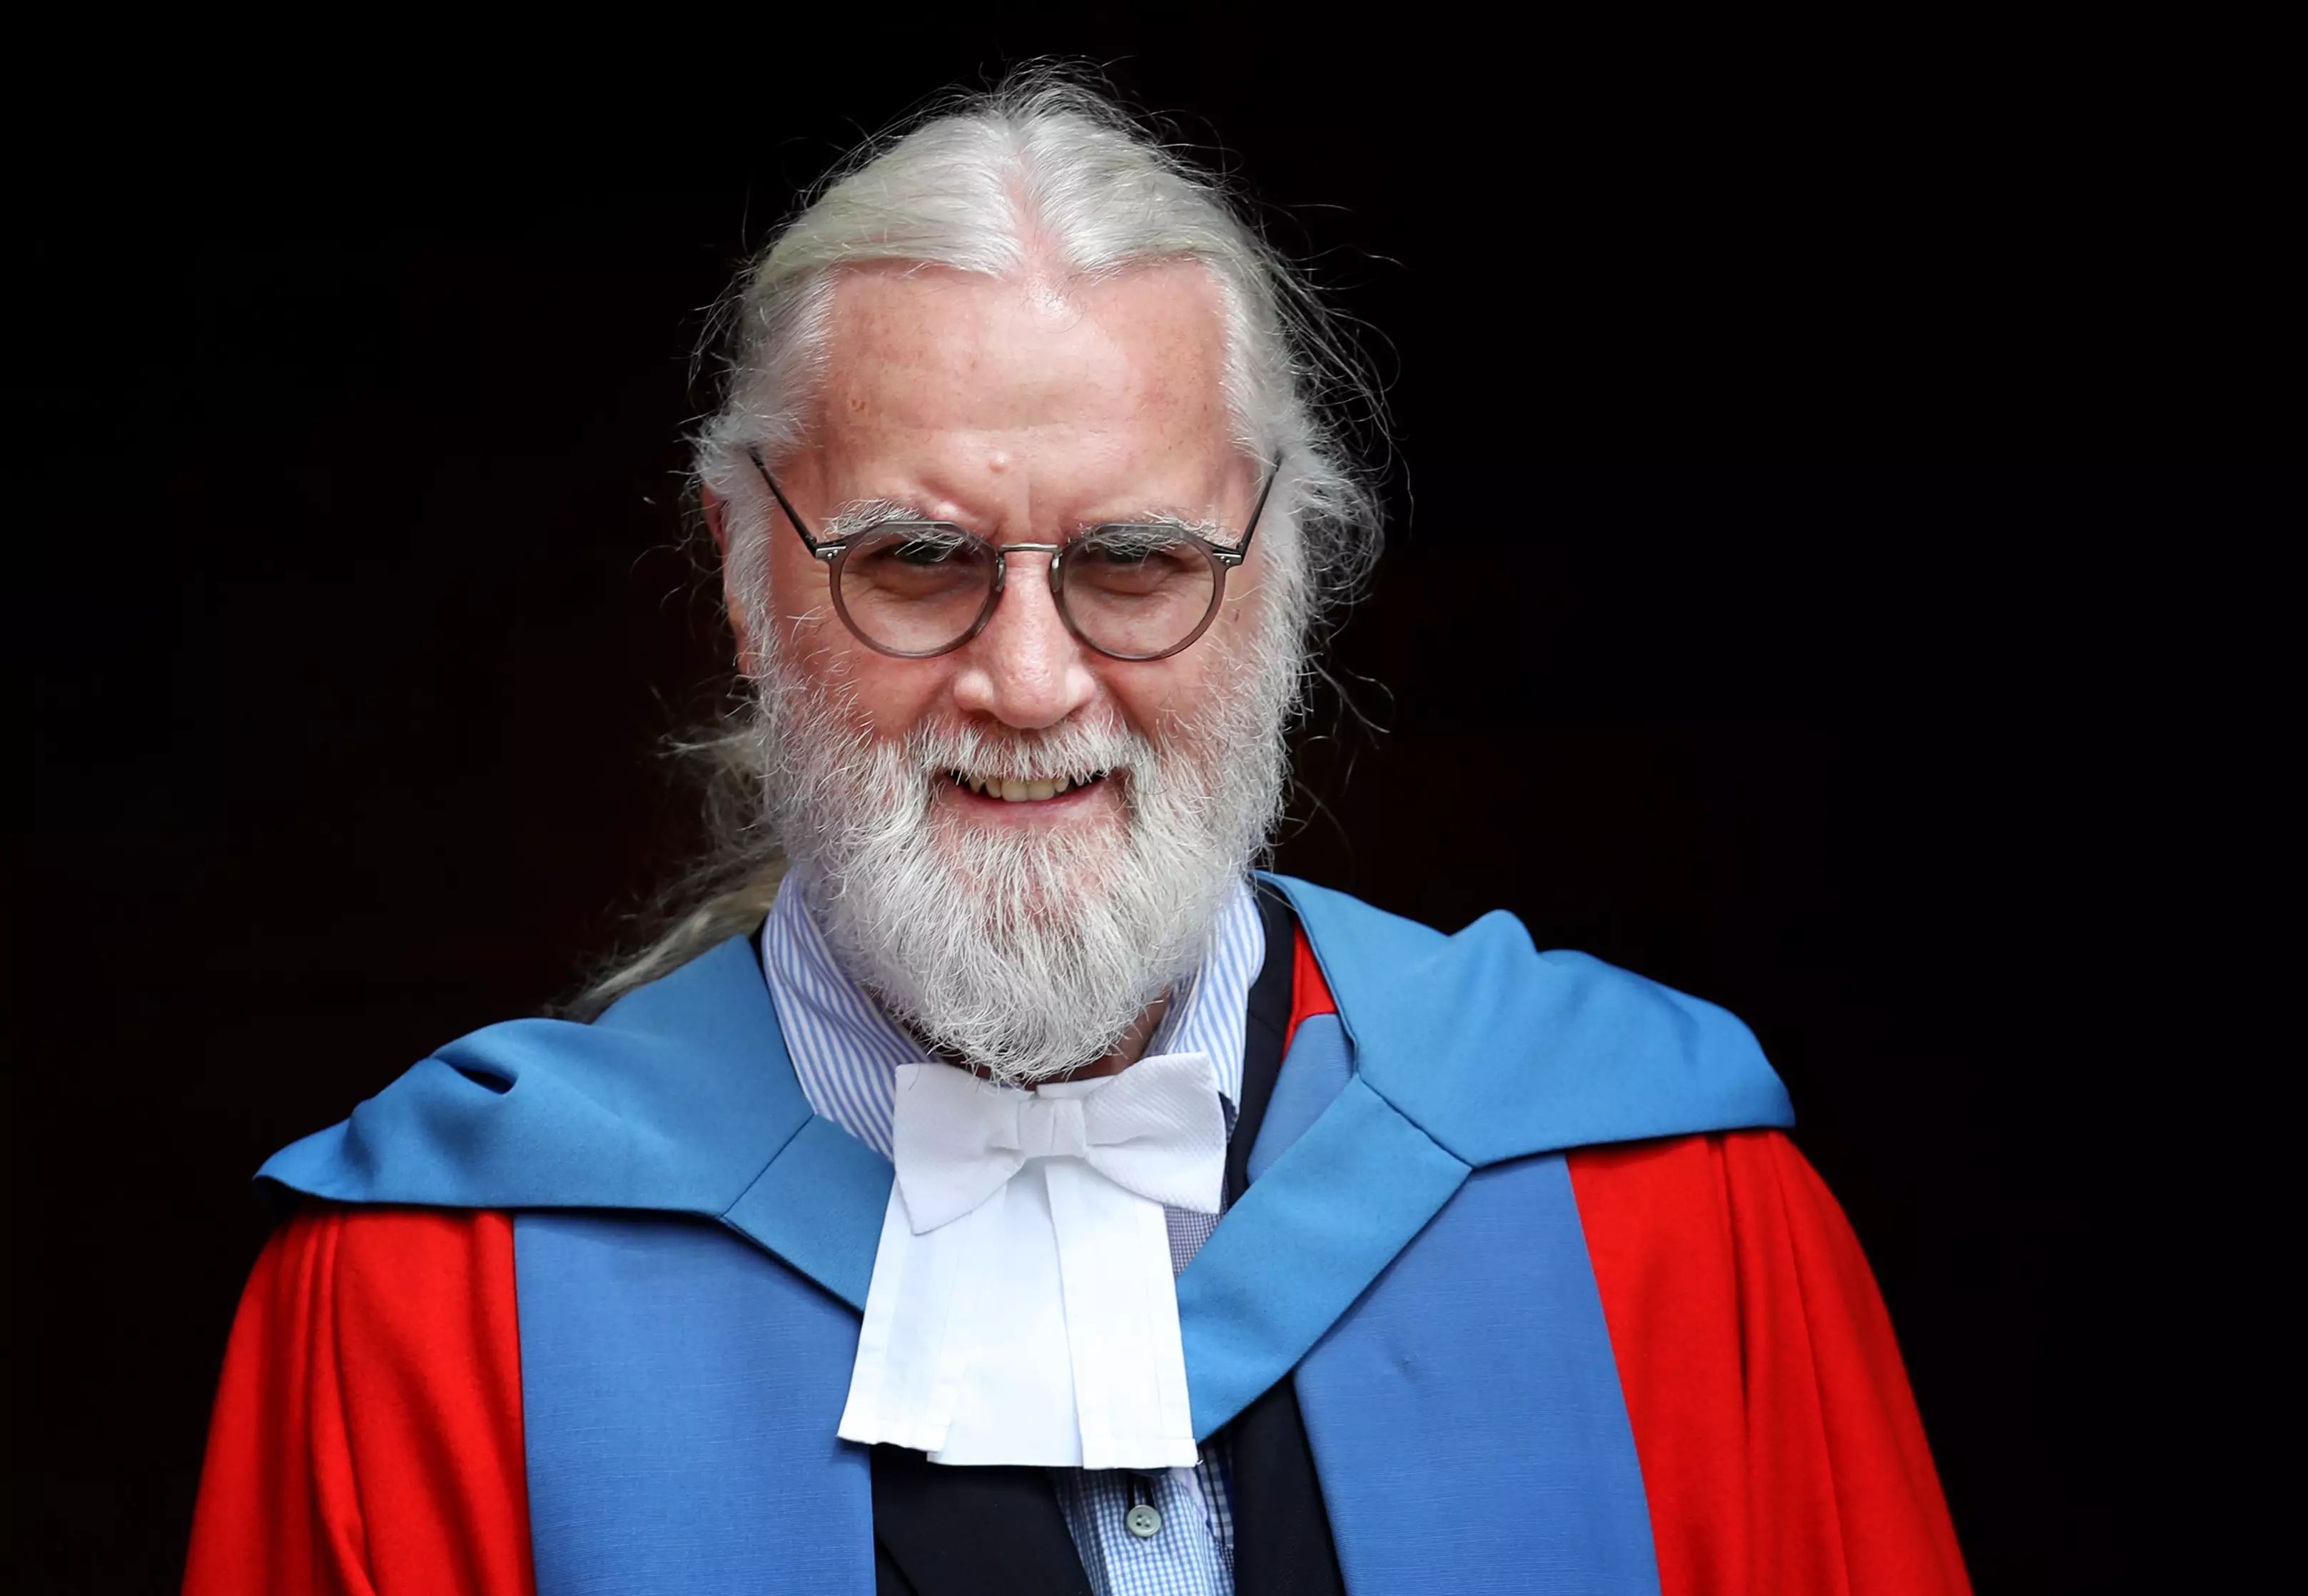 Sir Billy Connolly after he received his Honorary Doctorate degree.